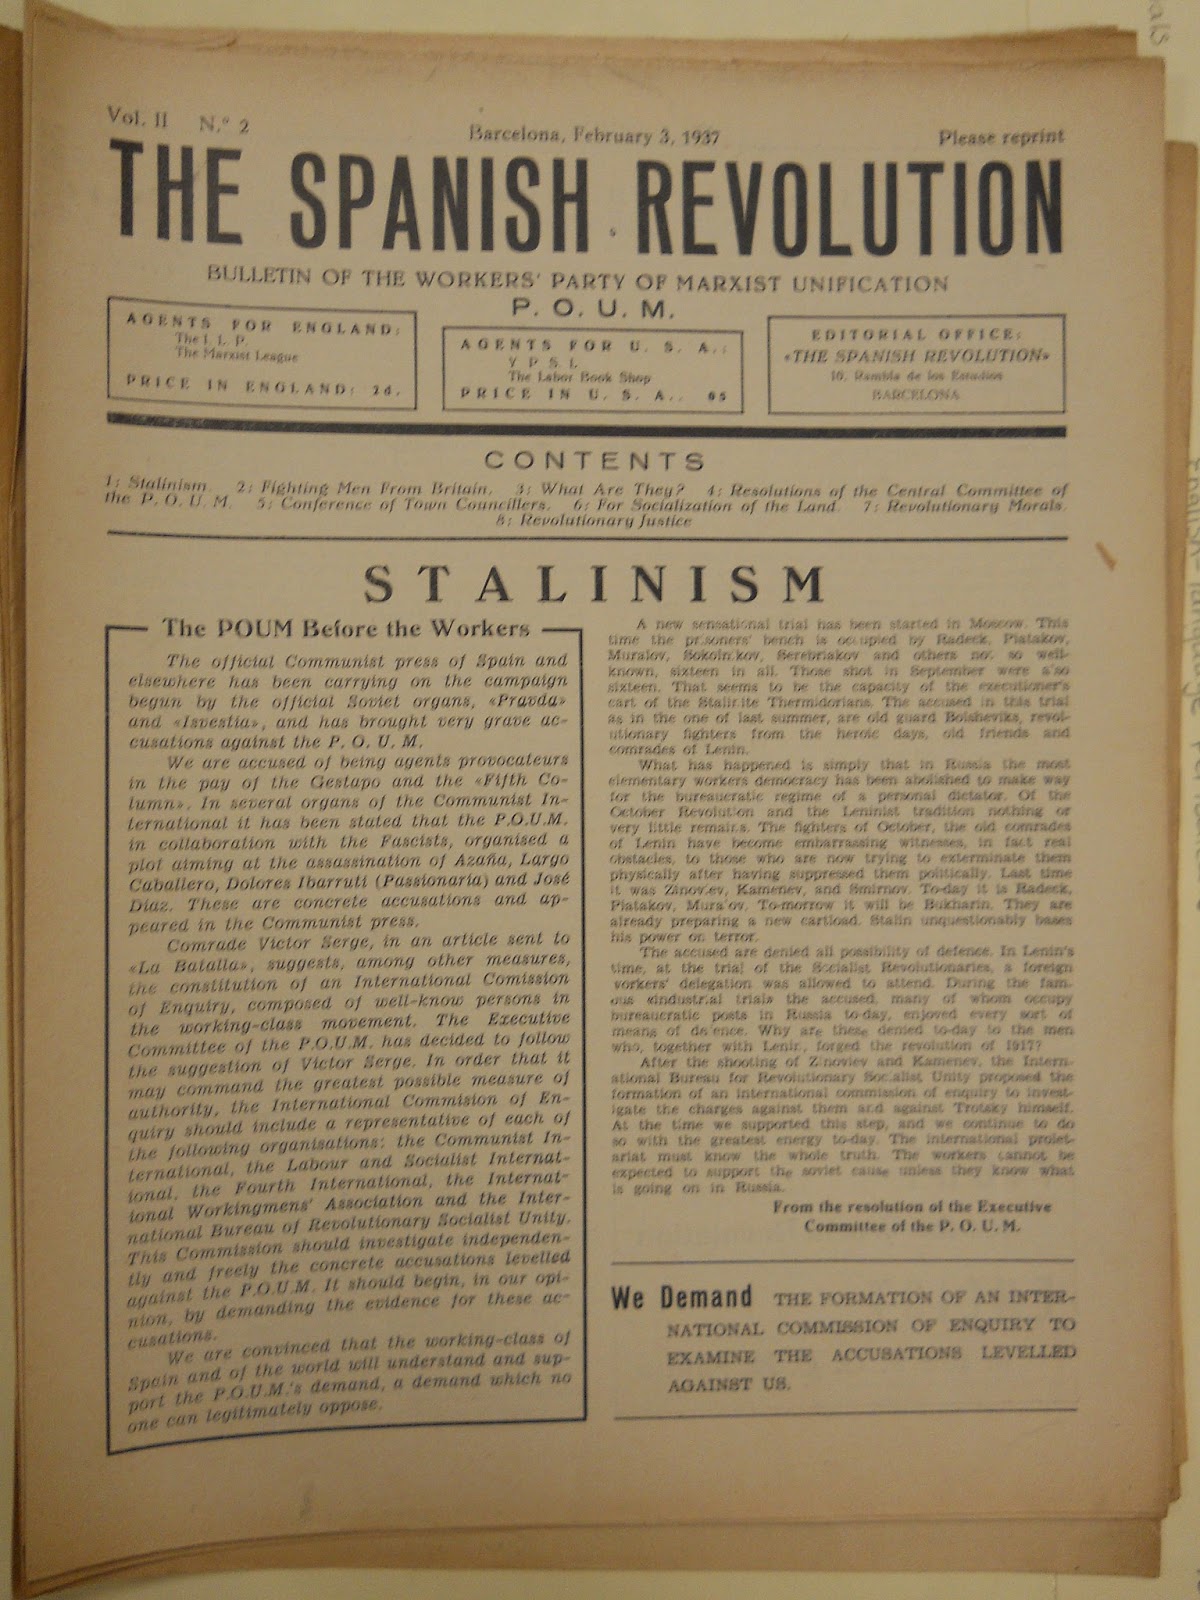 Issue of The Spanish Revolution, bulletin of the Workers Party of Marxist Unification P.O.U.M.